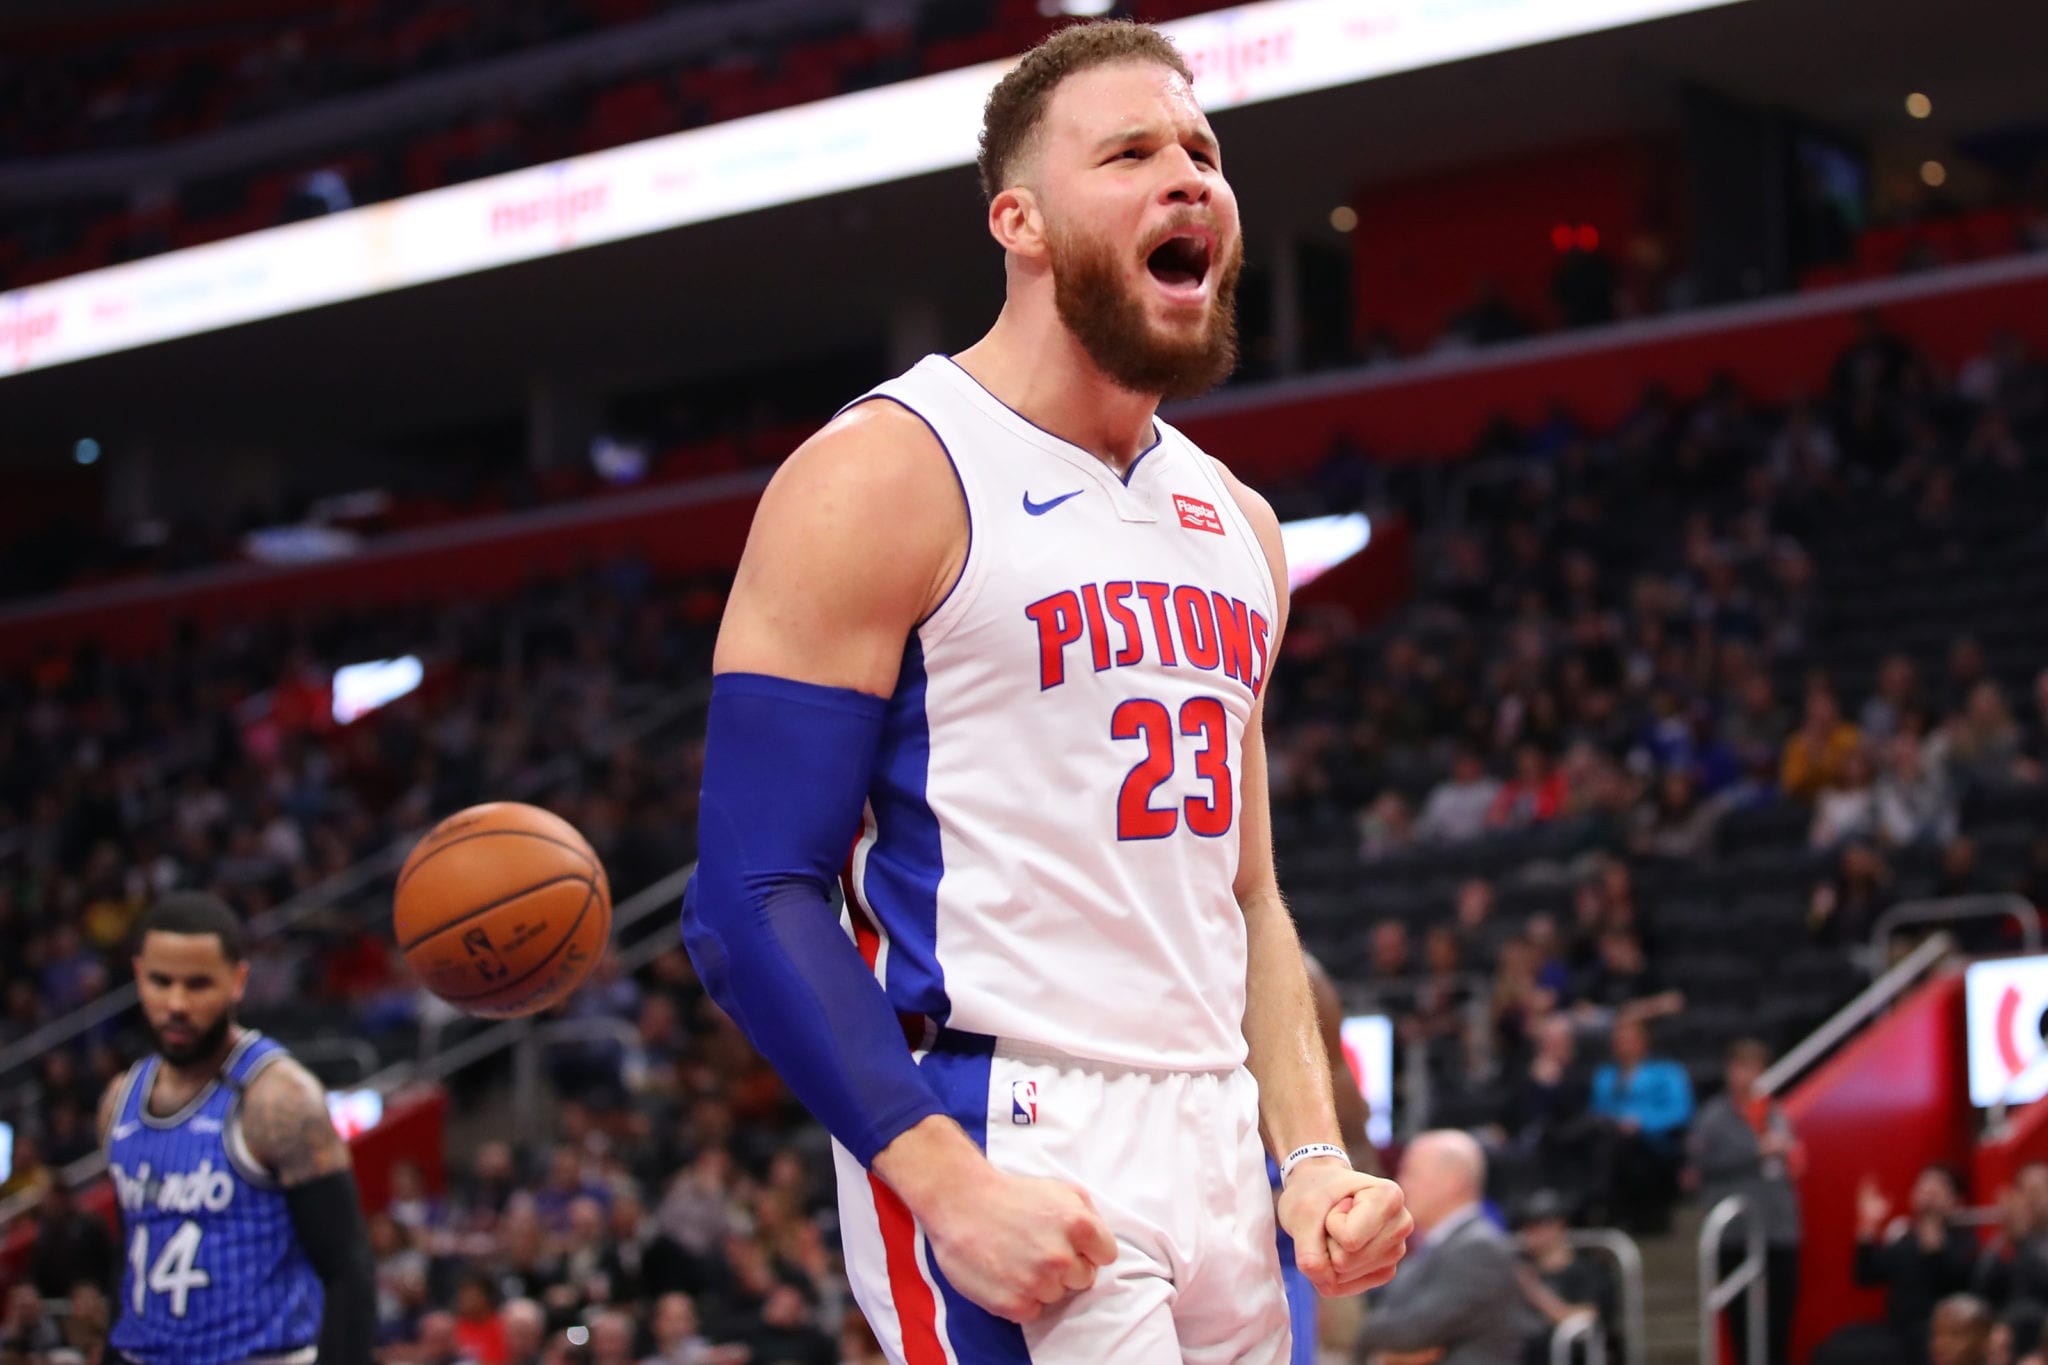 Blake Griffin Is Expected to Sign With Brooklyn Nets for shot at title